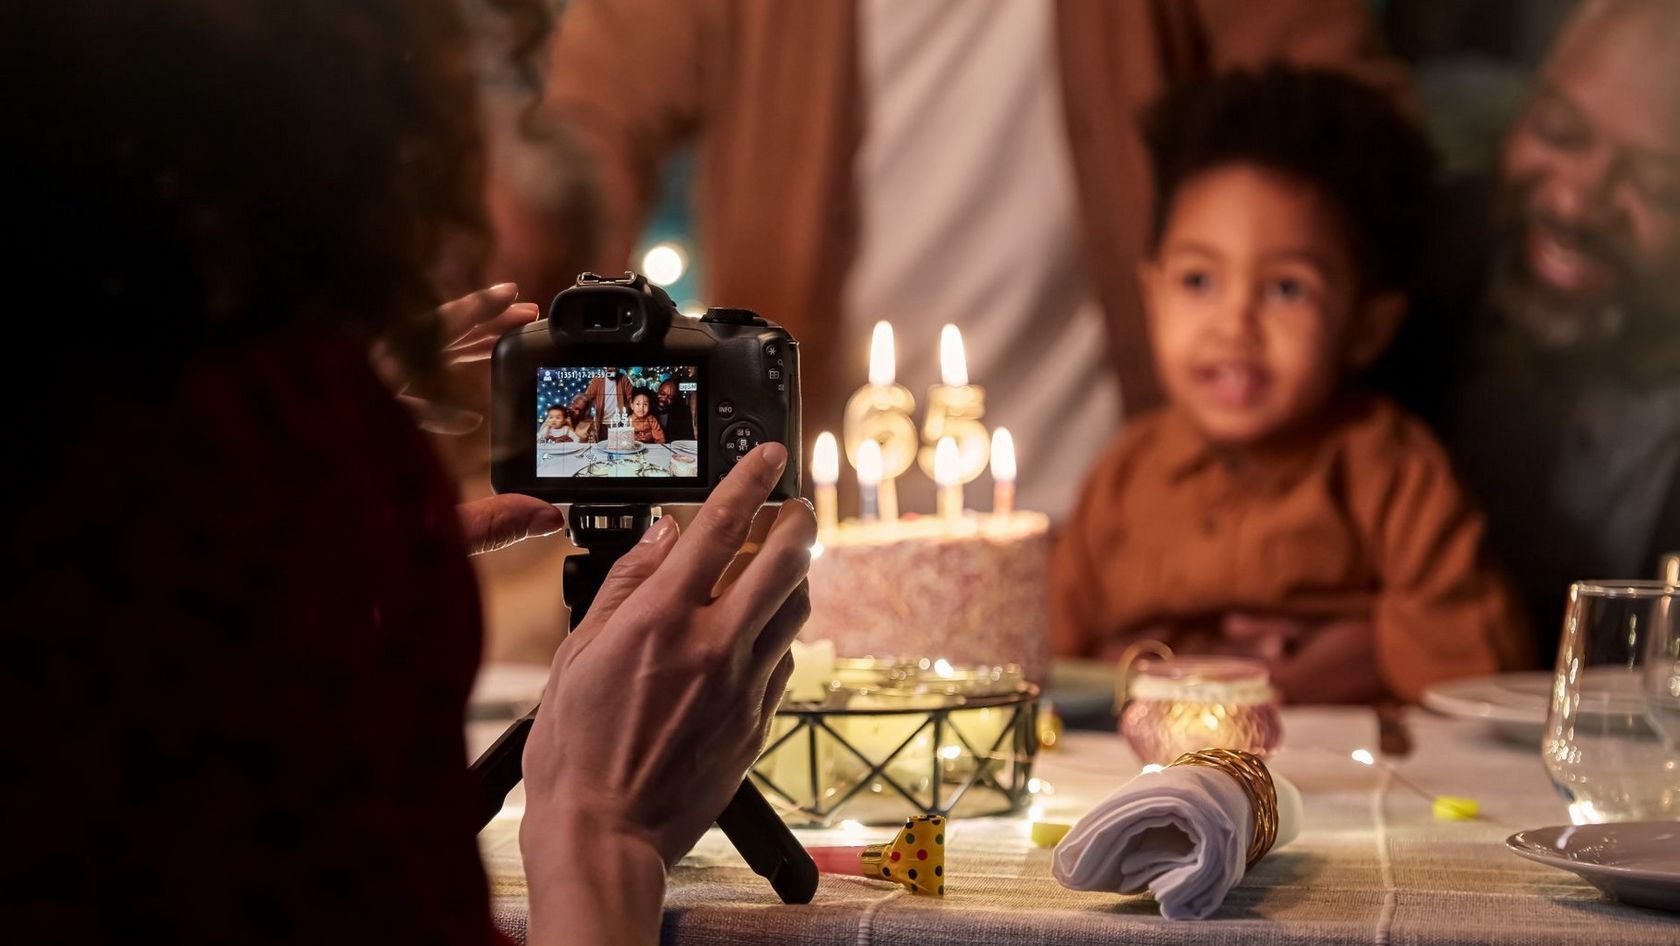 Print and share precious memories in an instant with the Canon Zoemini –